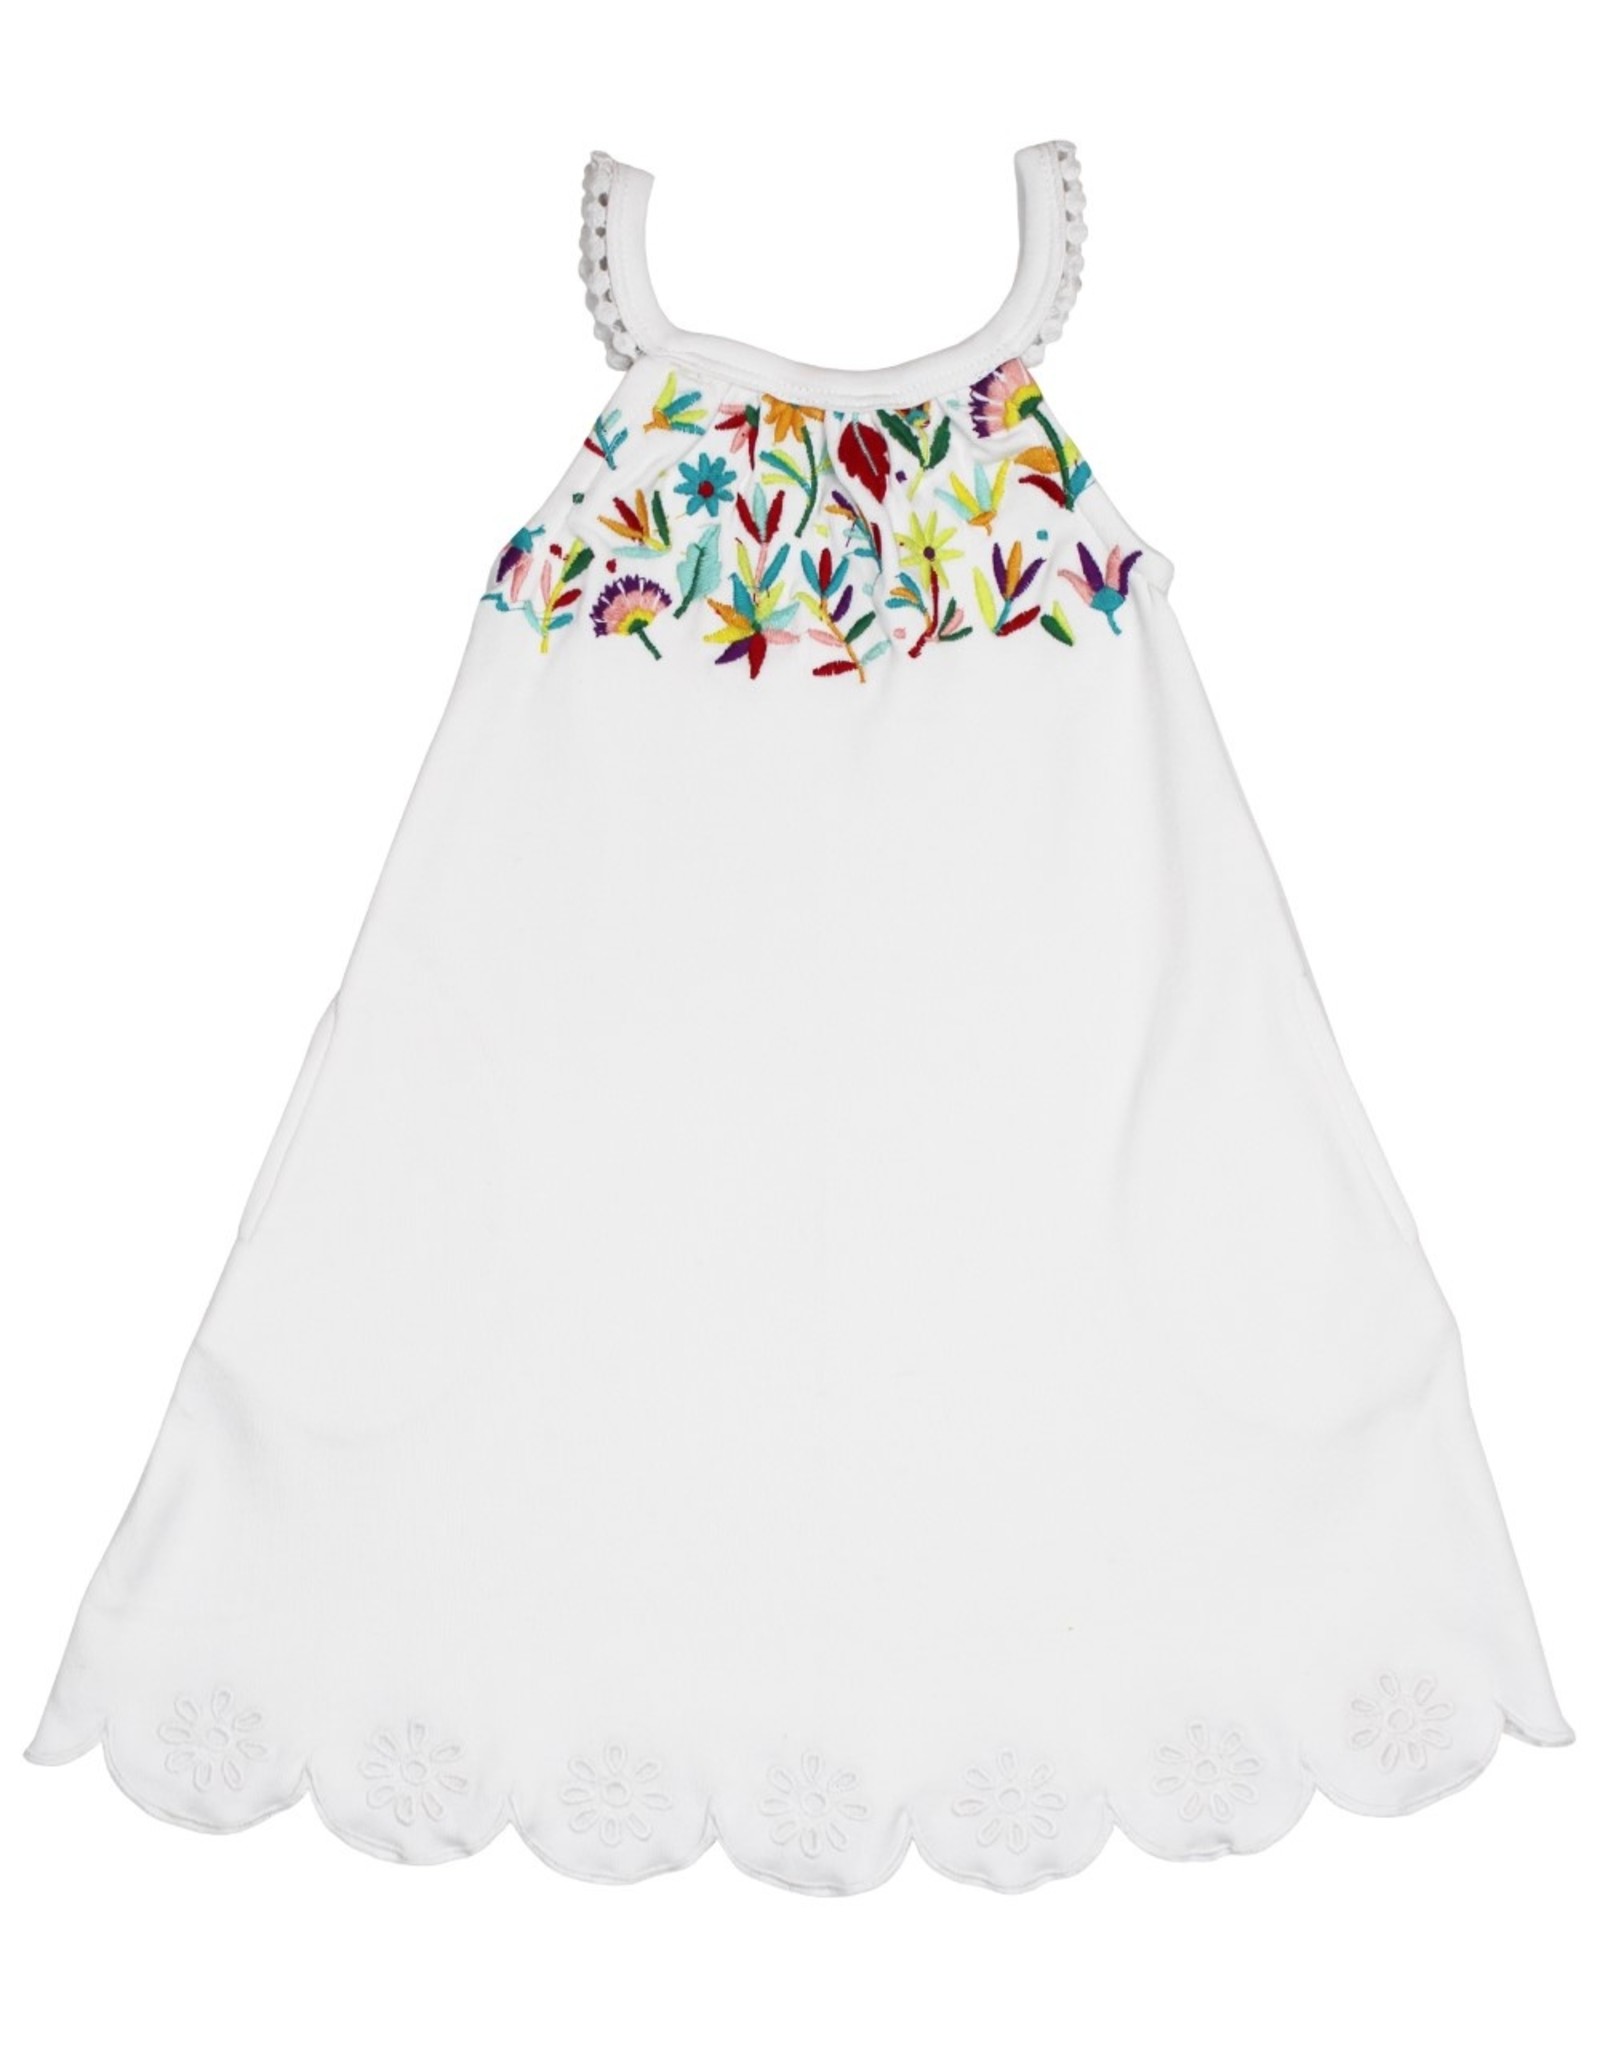 L'oved Baby Baby Embroidered Twirl Dress White Floral